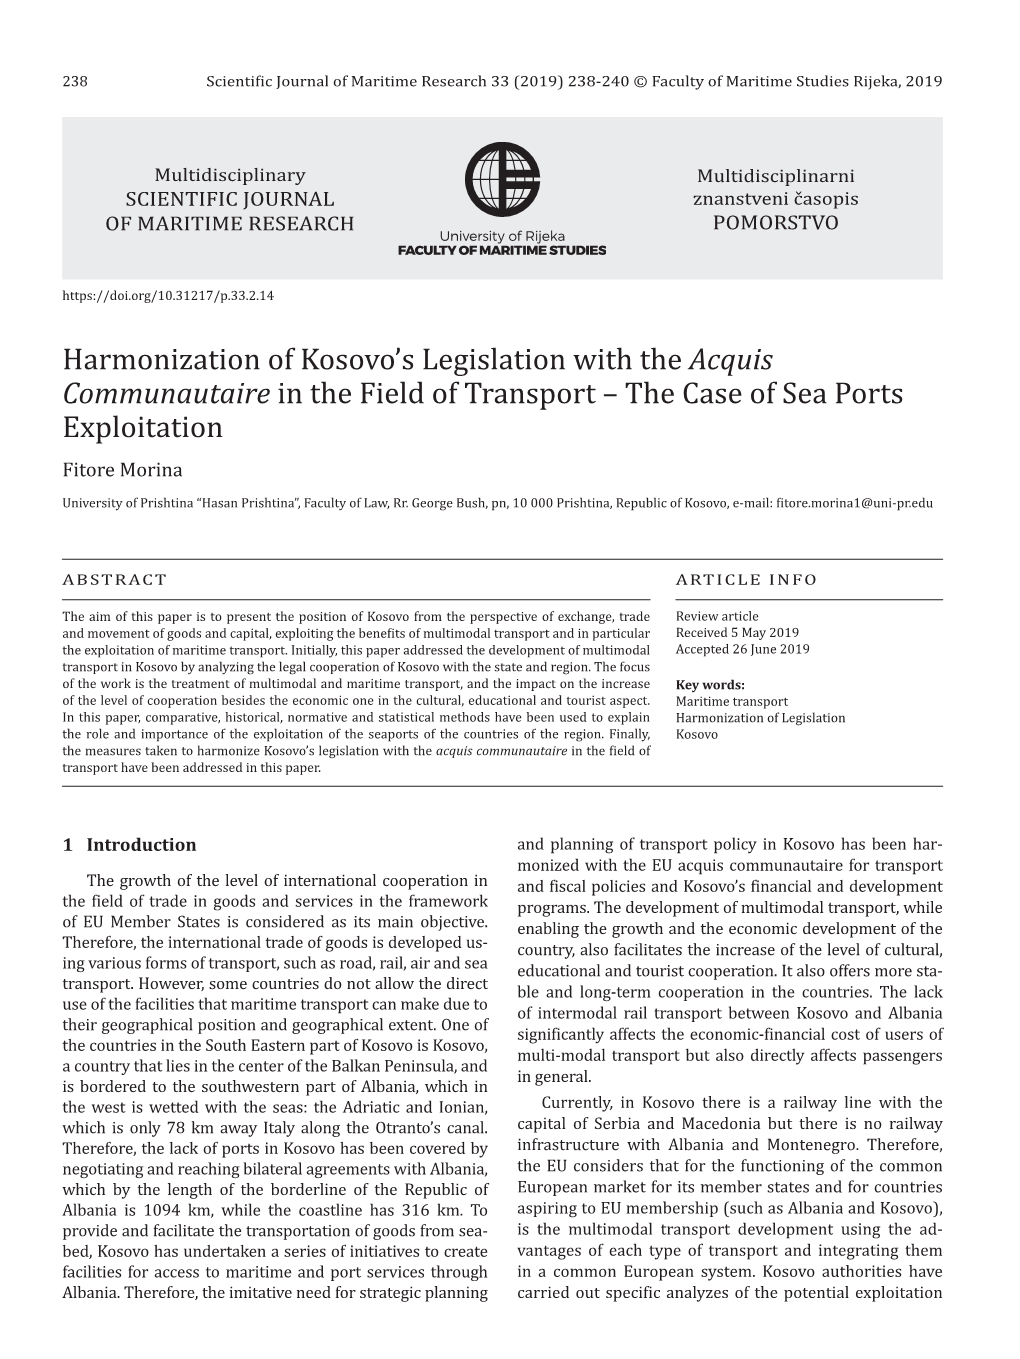 Harmonization of Kosovo's Legislation with the Acquis Communautaire in the Field of Transport – the Case of Sea Ports Exploi